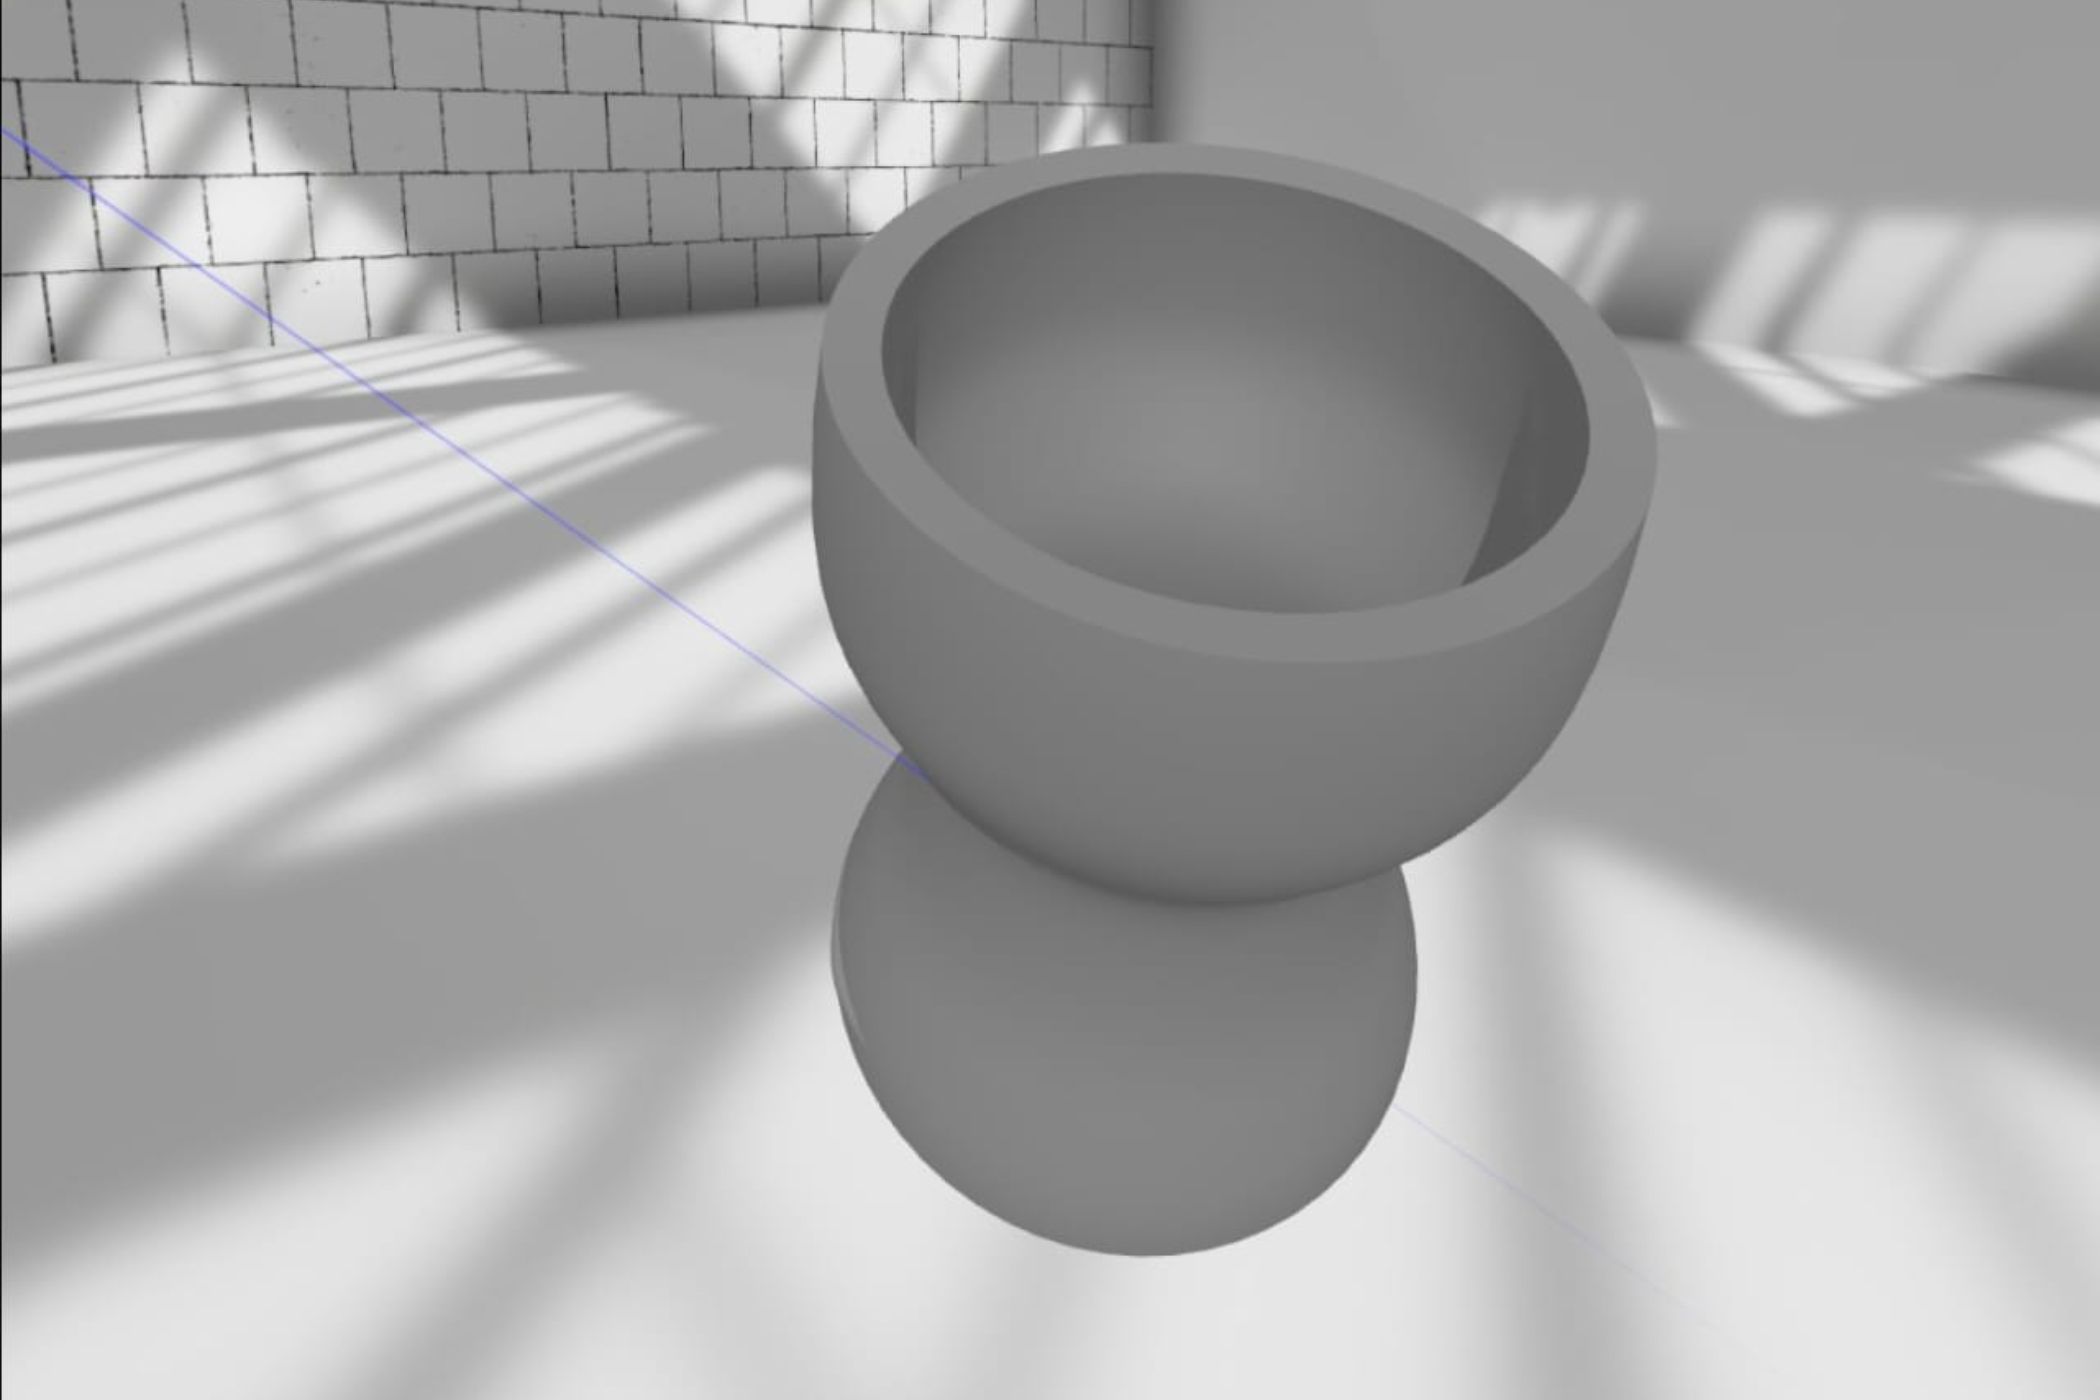 A screenshot from Gravity Sketc showing the author's pitiful attempt at making a flower pot.